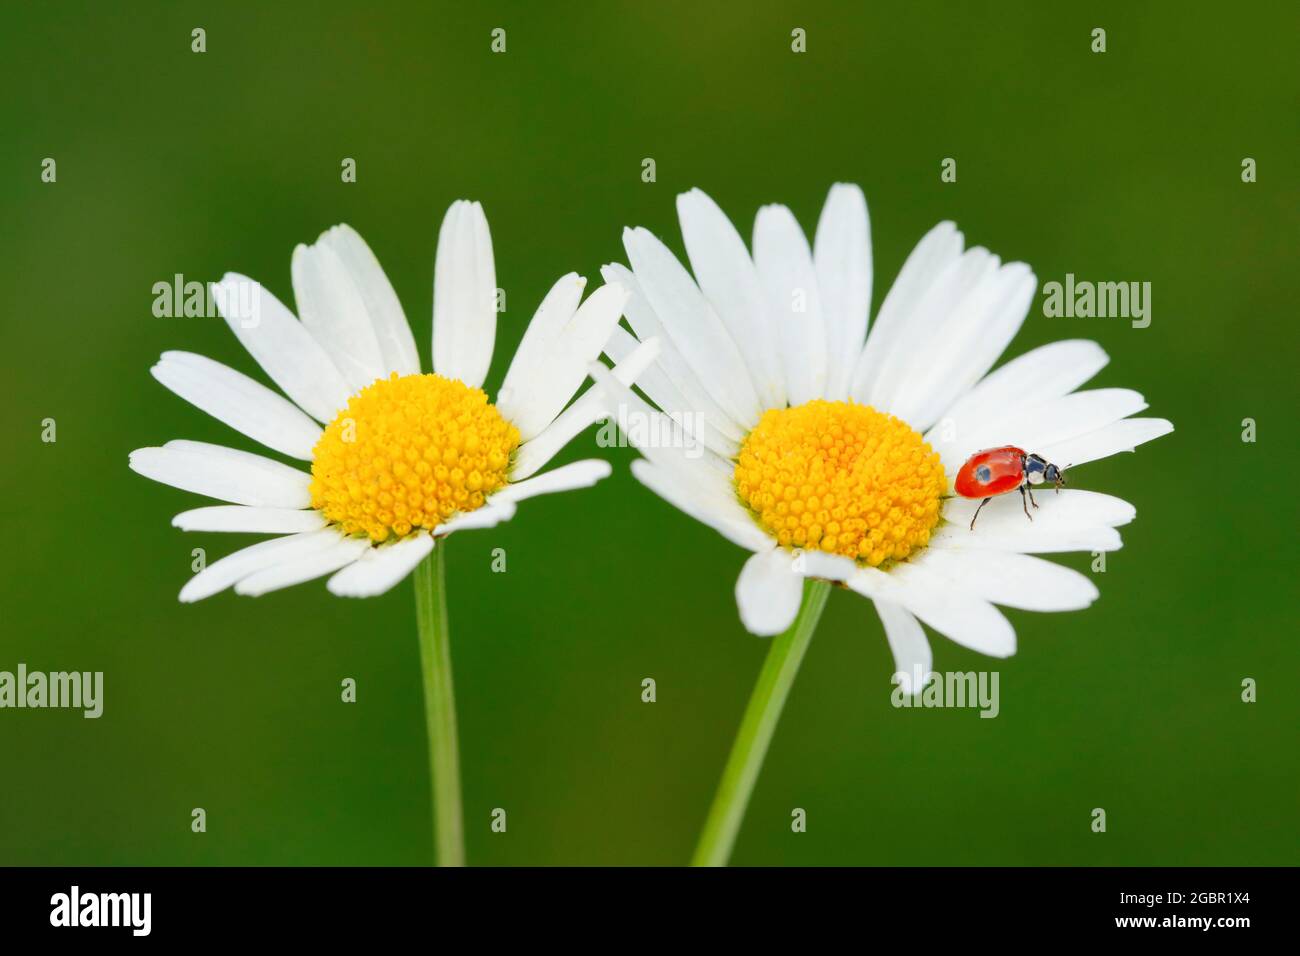 zoology, insects (Insecta), two-spot ladybird on marguerite, Switzerland, NO-EXCLUSIVE-USE FOR FOLDING-CARD-GREETING-CARD-POSTCARD-USE Stock Photo